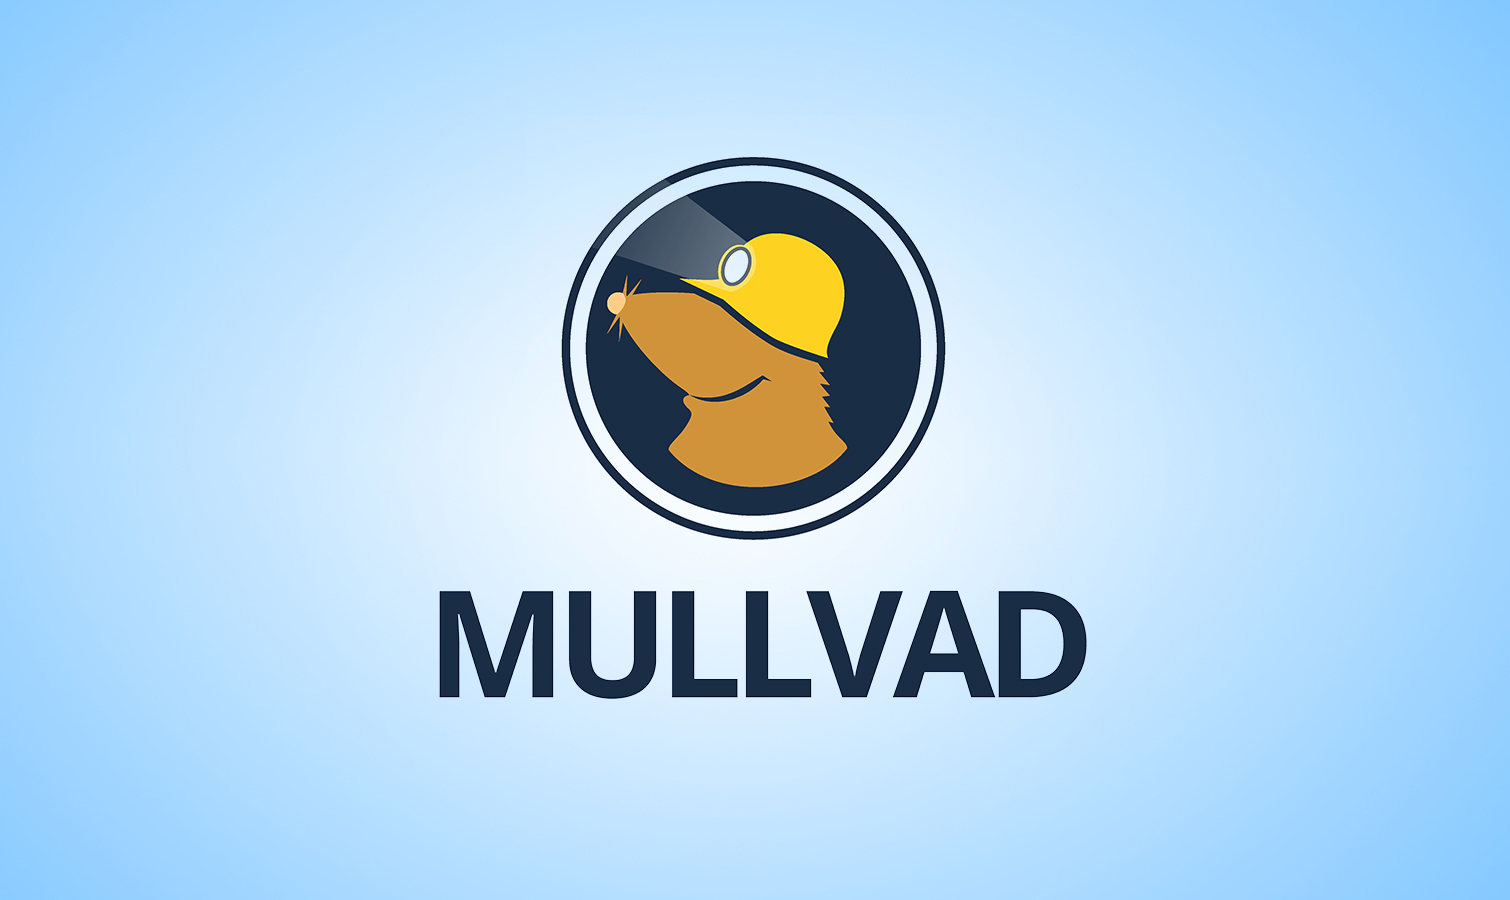 Mullvad Vpn Full Review And Benchmarks Tom S Guide Images, Photos, Reviews